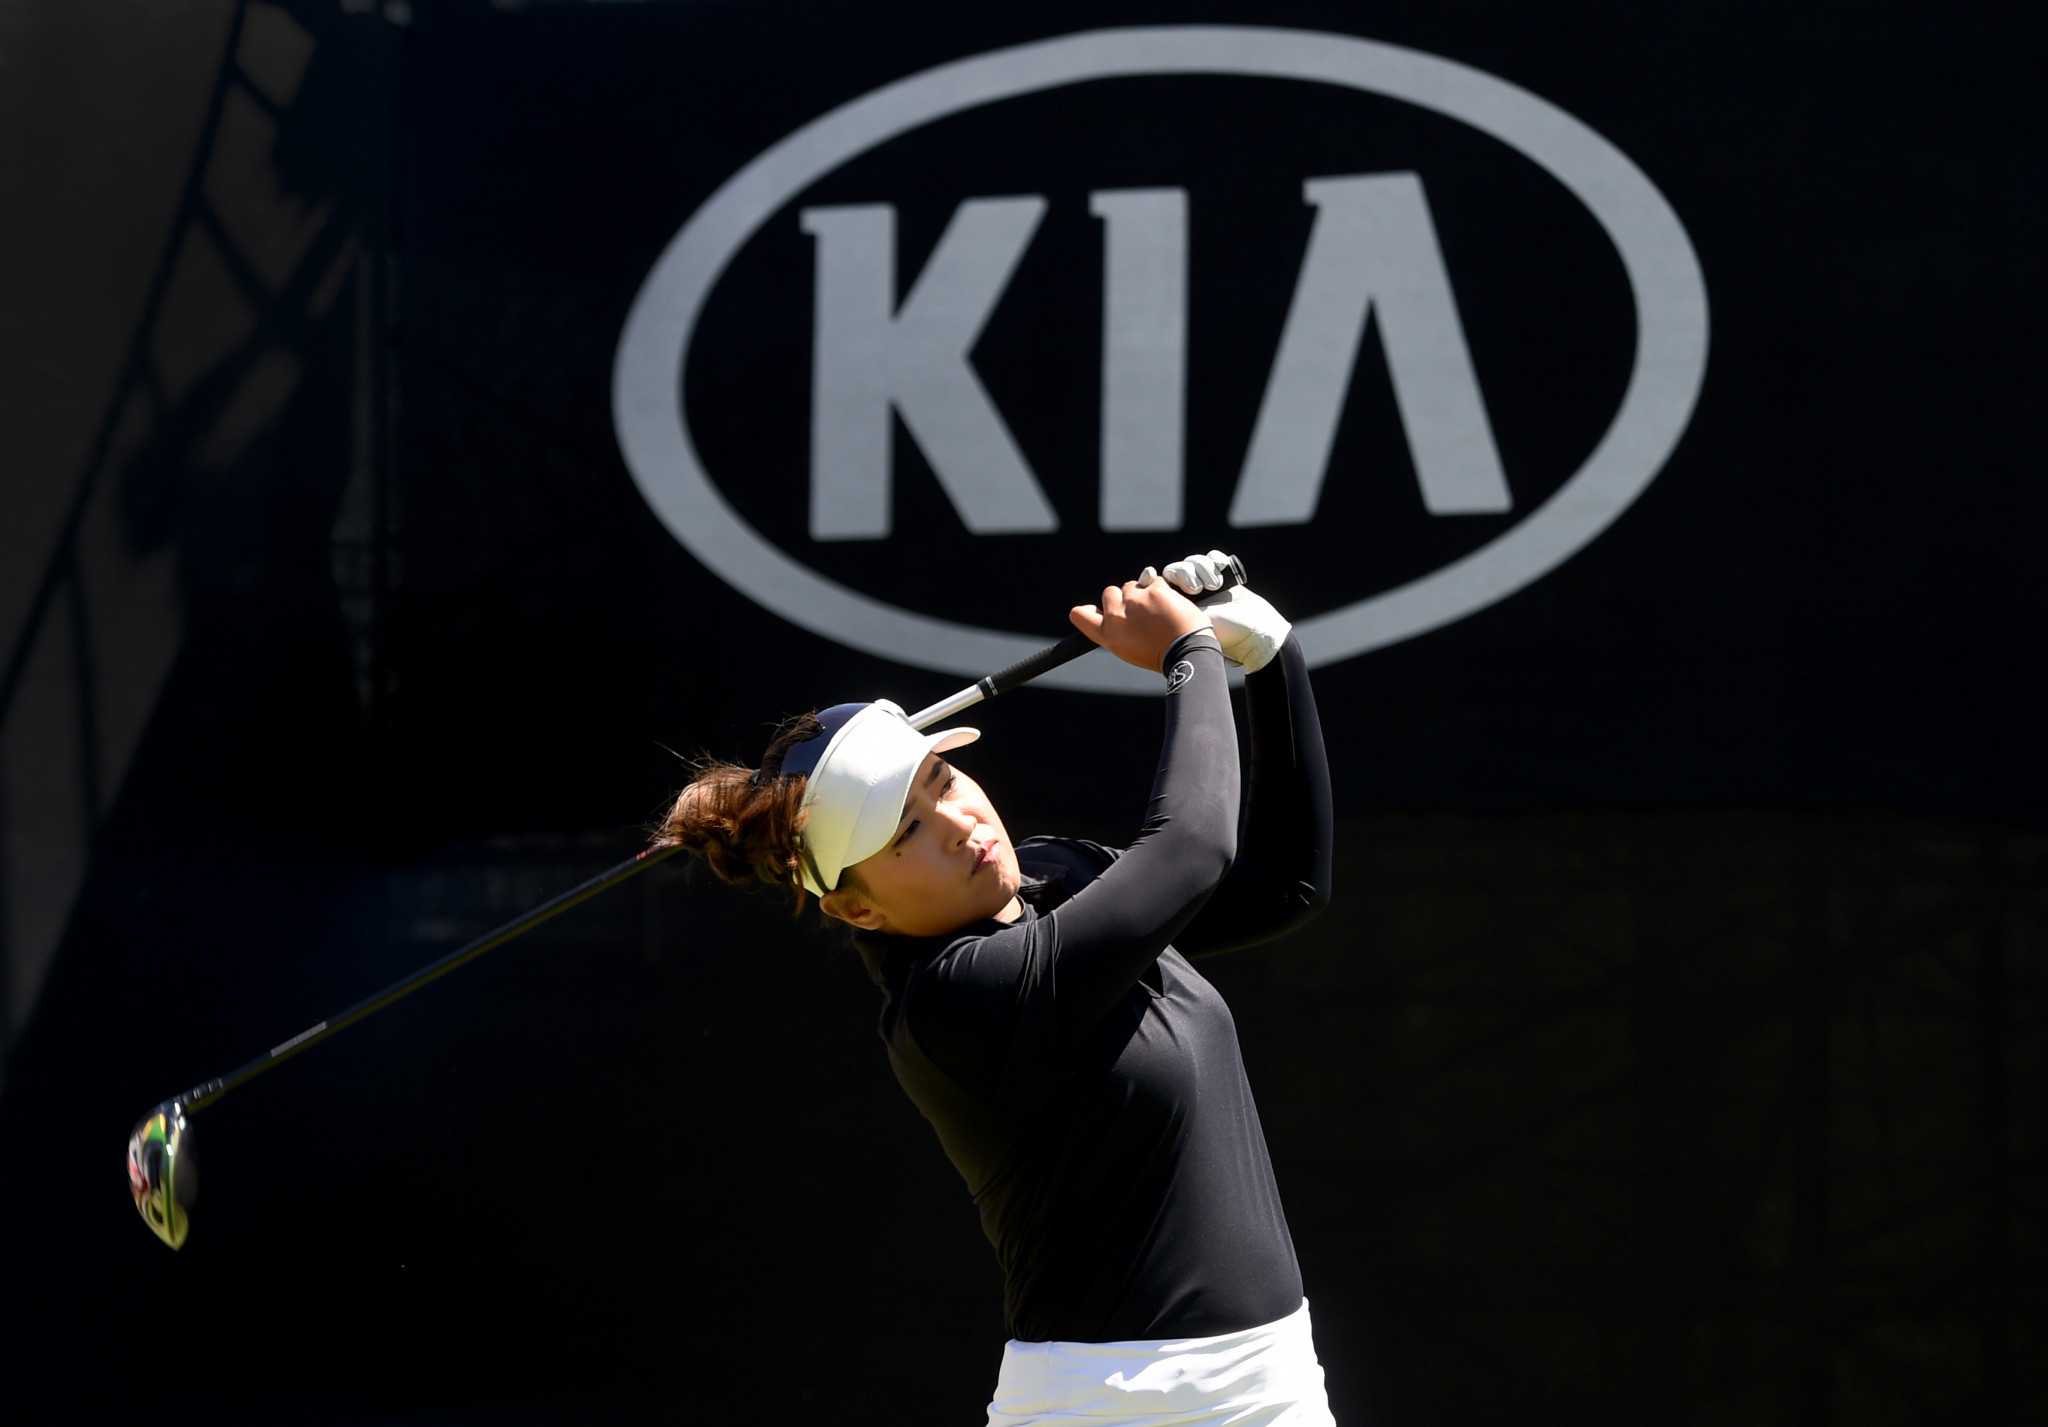 The Ladies Professional Golf Association announced the cancellation of next month's Kia Classic in California ©Getty Images